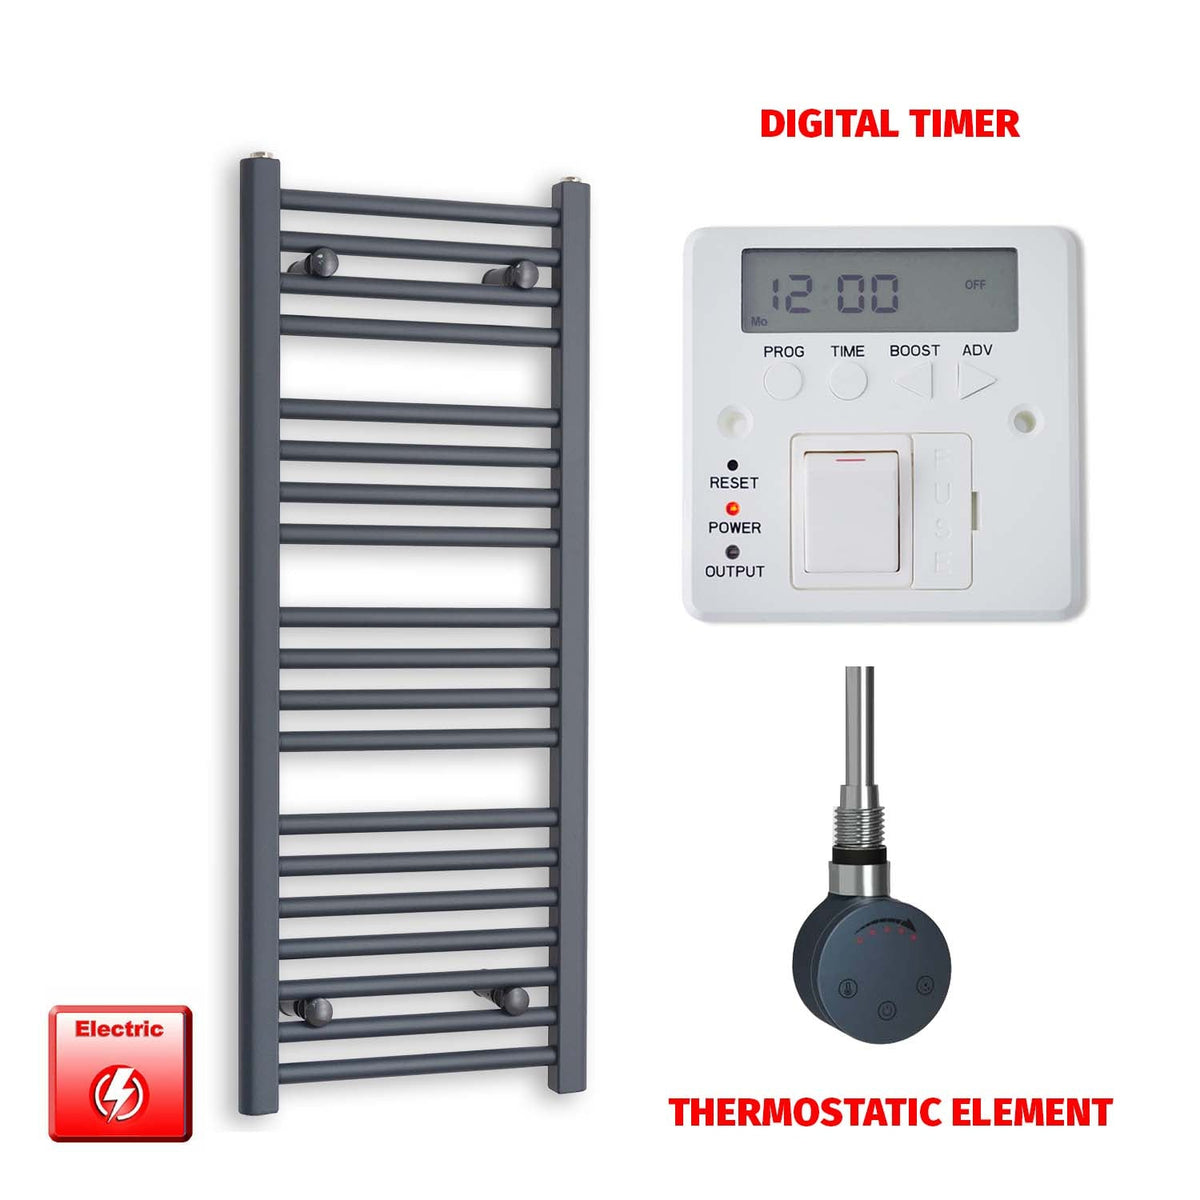 1000 x 400 Flat Anthracite Pre-Filled Electric Heated Towel Radiator HTR SMR Thermostatic element Digital timer